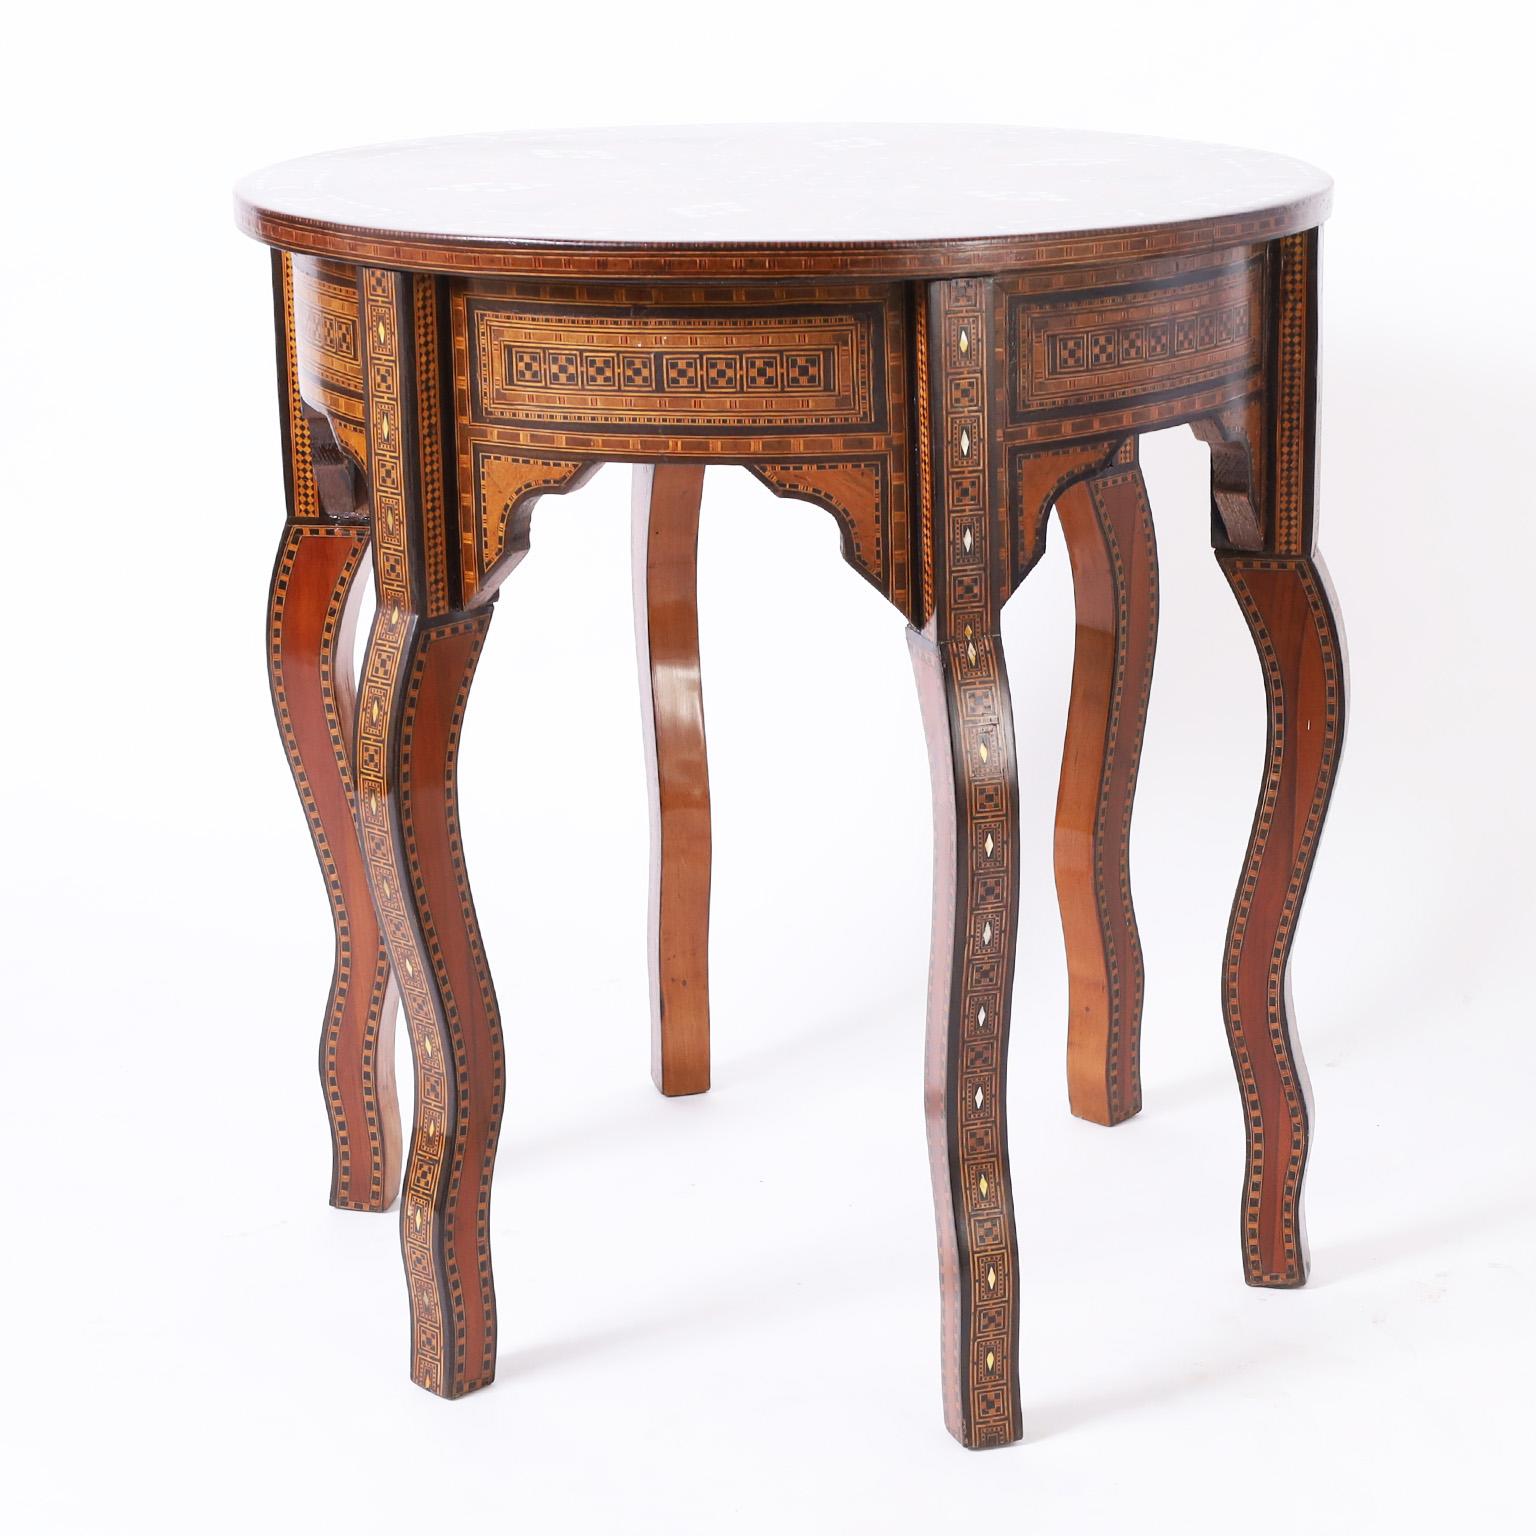 Impressive antique Moroccan round table crafted in walnut with a dazzling display of inlaid marquetry on the top using mother of pearl, bone, ebony, kingwood, mahogany, and teak in elaborate geometric designs over a base with inlaid marquetry skirts